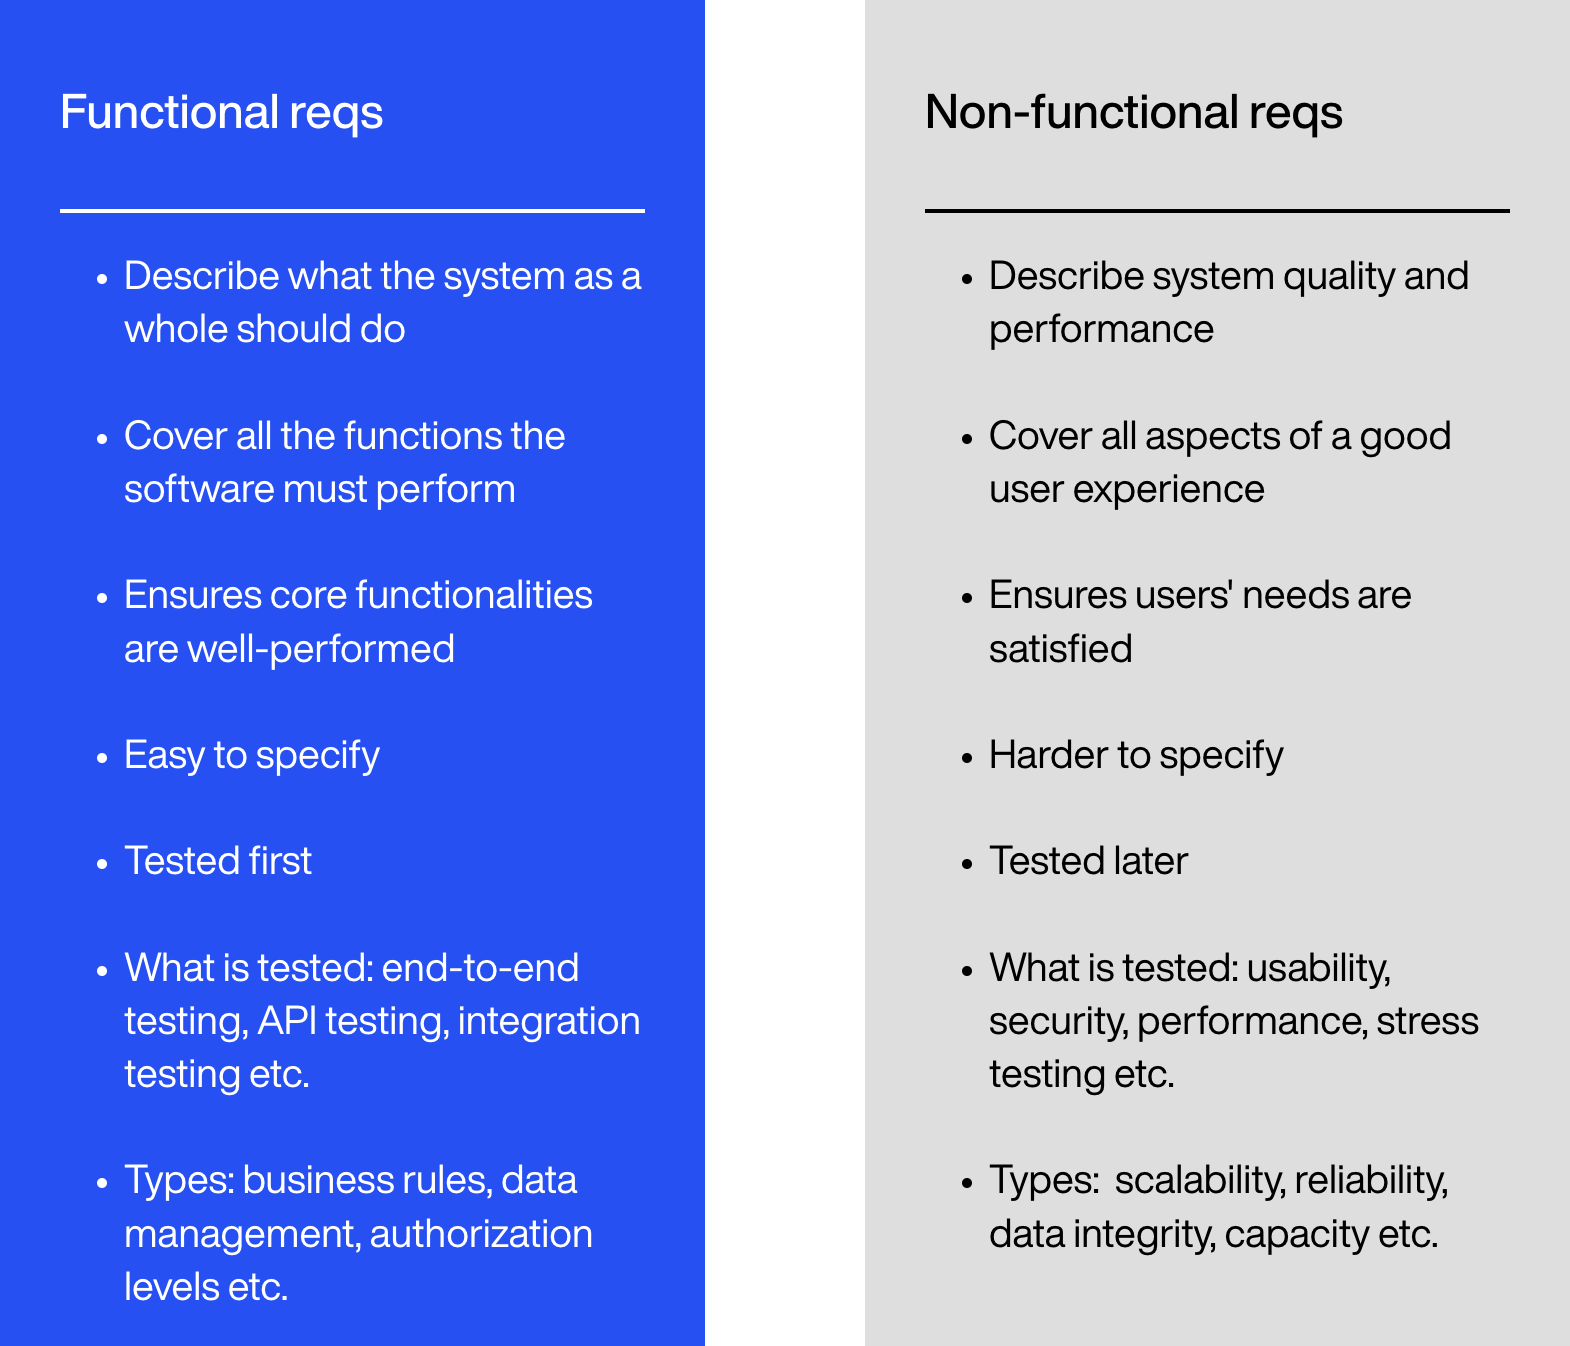 Functional vs non-functional requirements